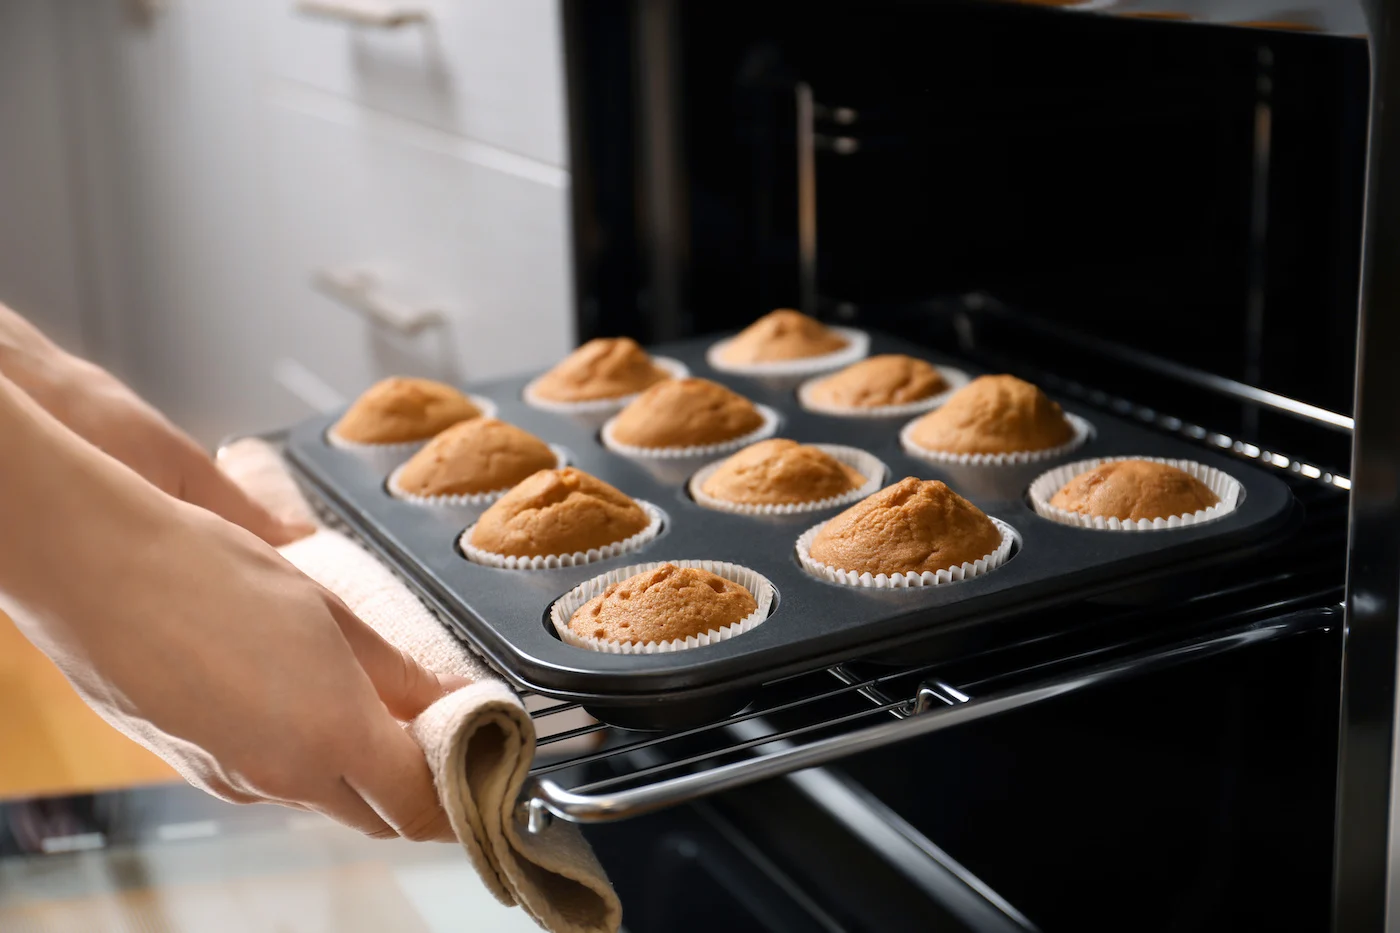 Baked-cupcakes-being-removed-from-the-oven